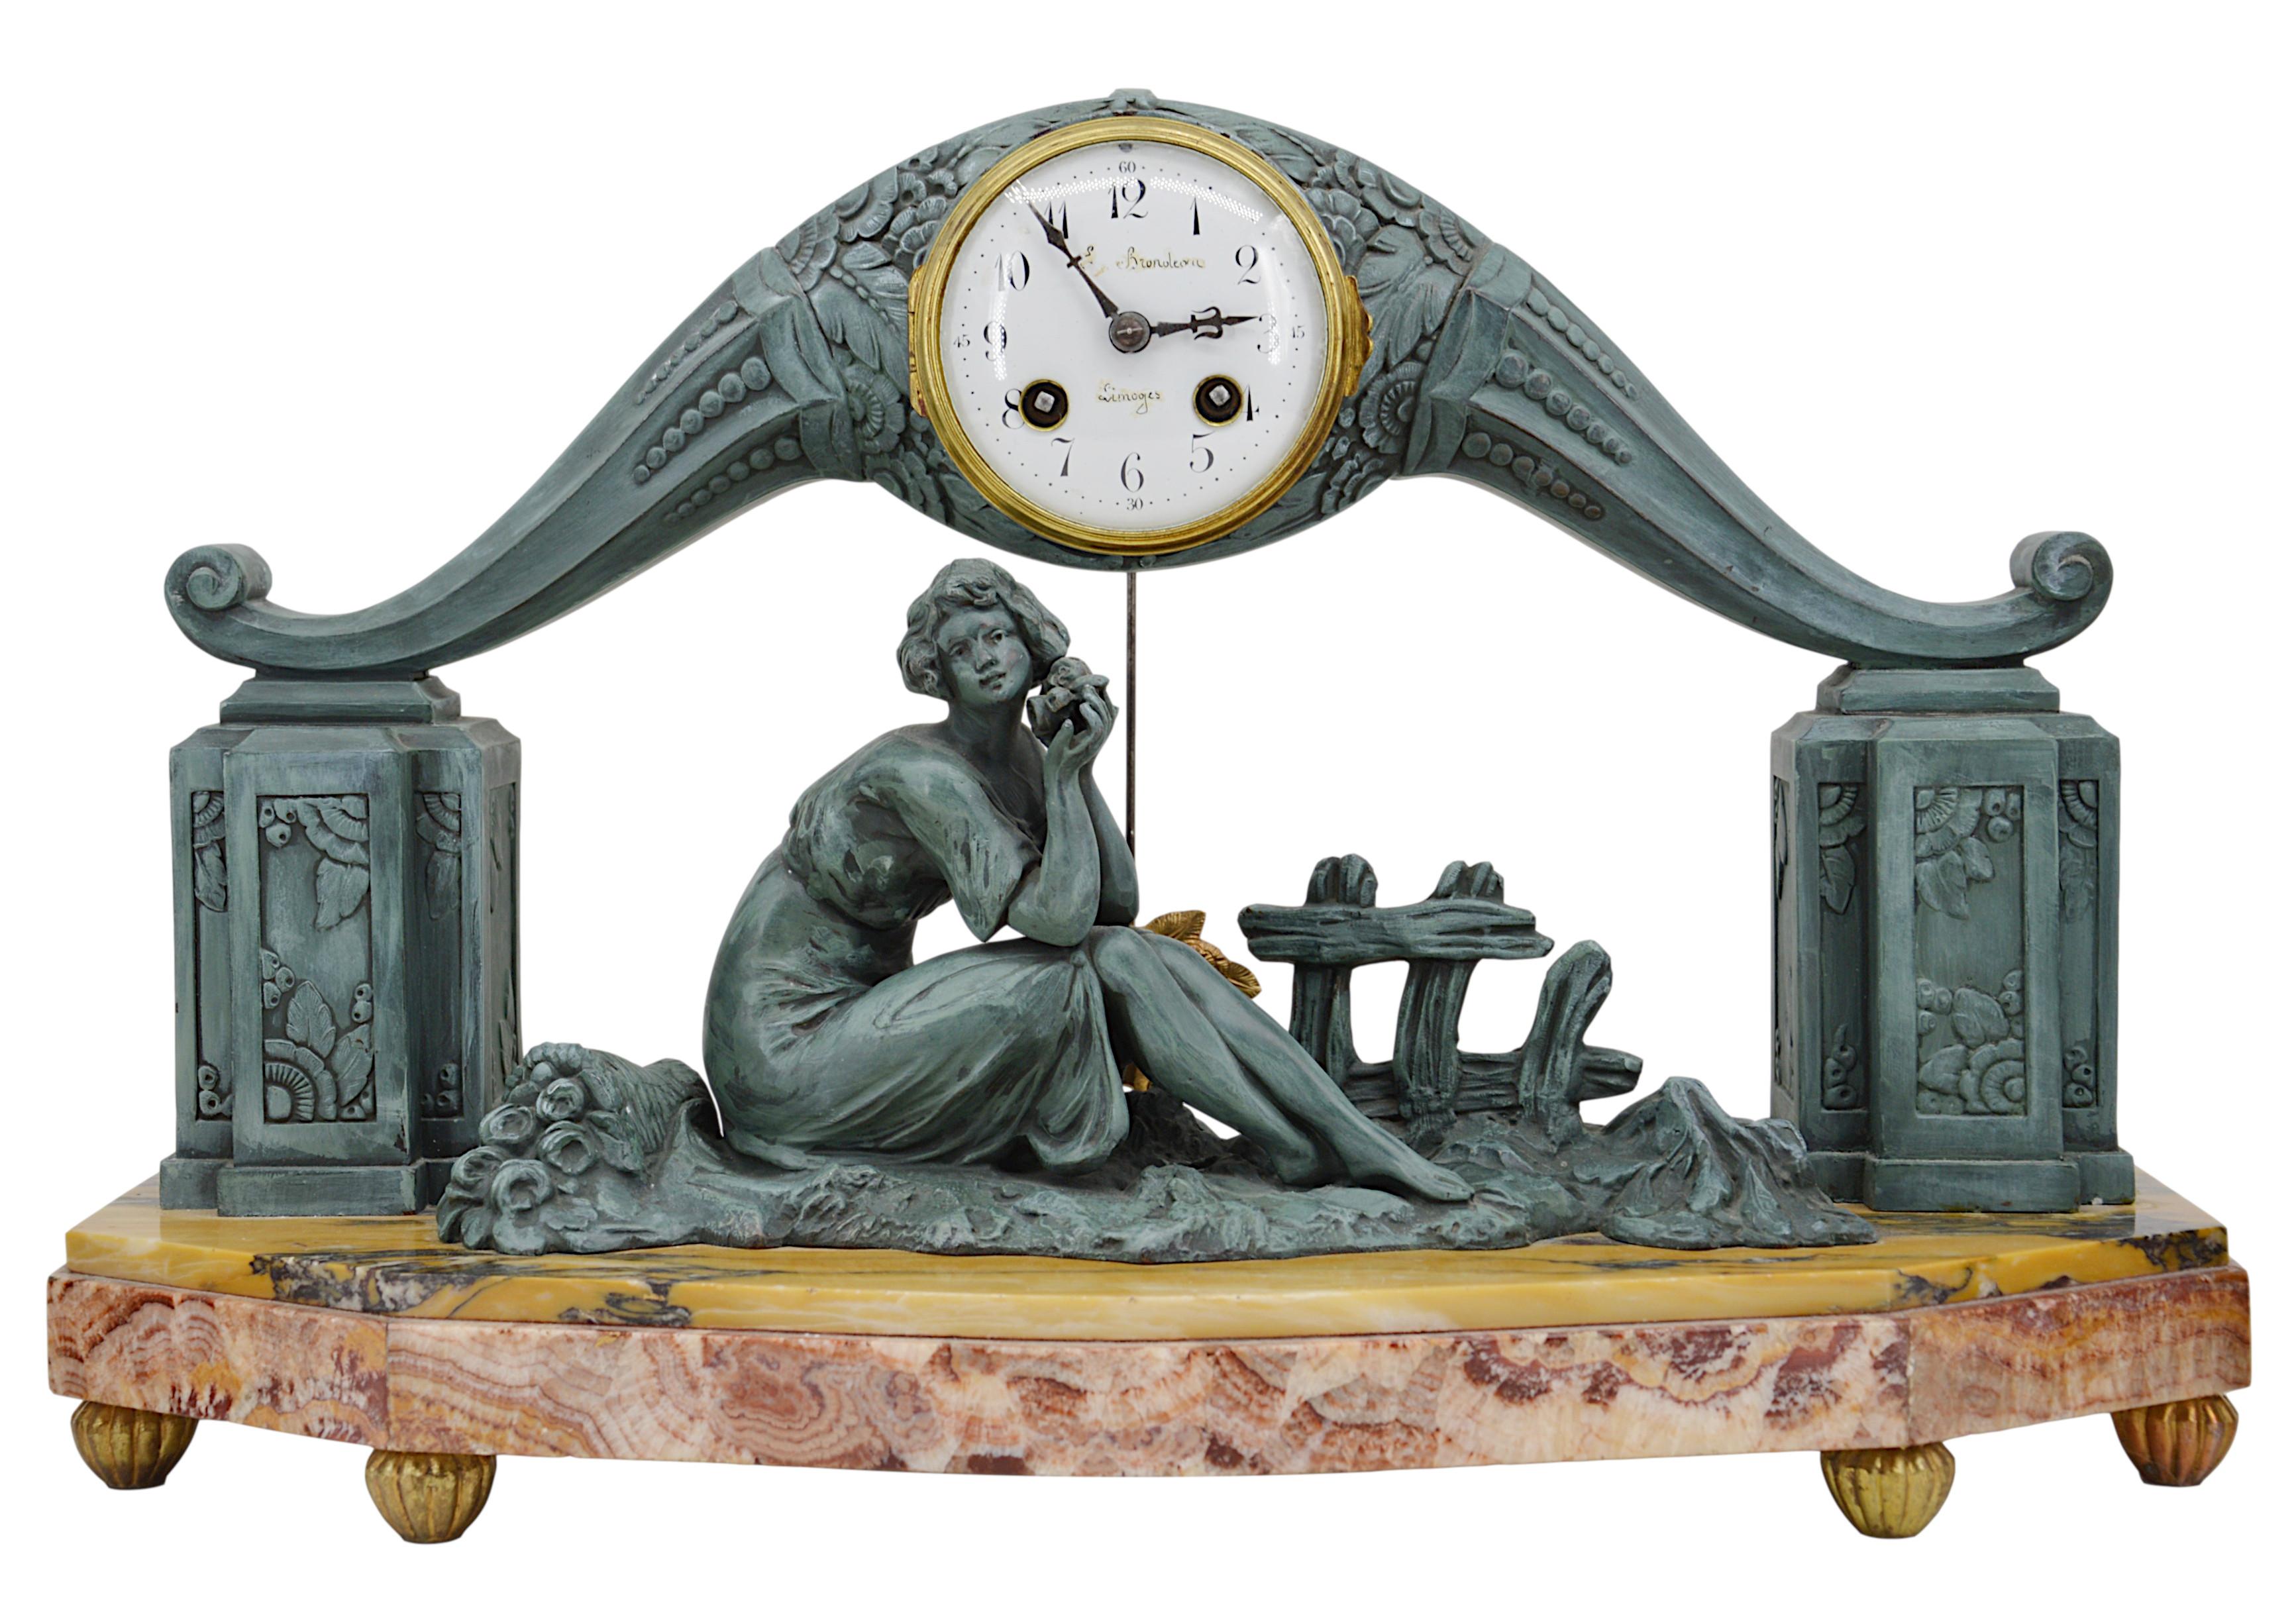 French Art Deco mantel clock set in the Süe & Mare style by Limousin, France, 1920s. Spelter, marble, bronze and brass. Clockmaker: E.Brondeau (Limoges). Sculptor: G.Limousin. 